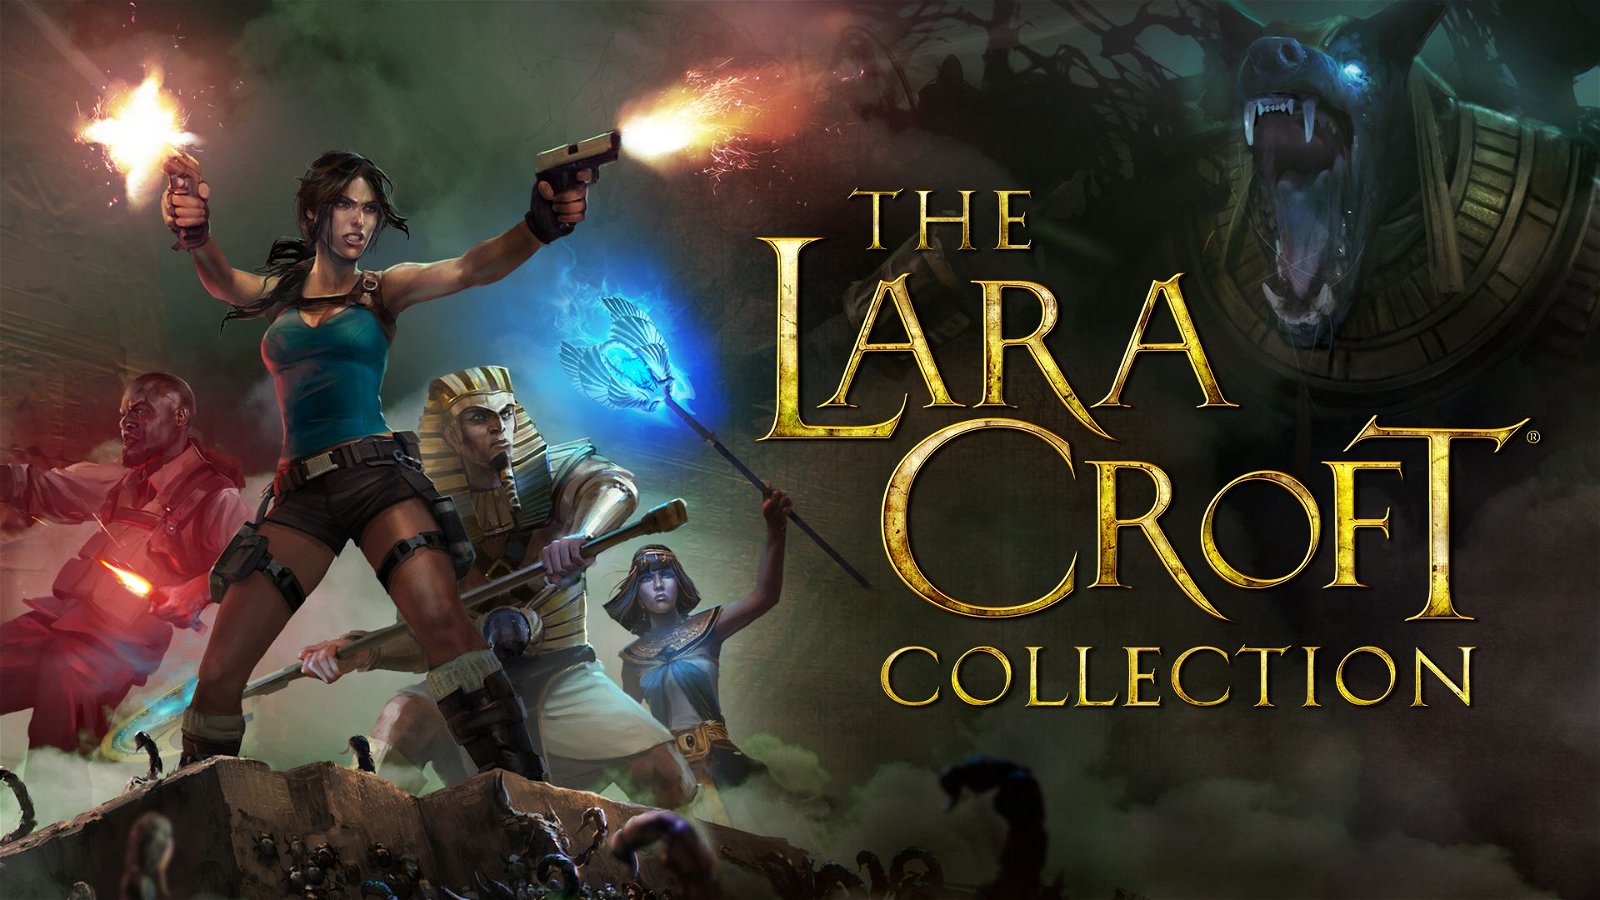 Image of The Lara Croft Collection